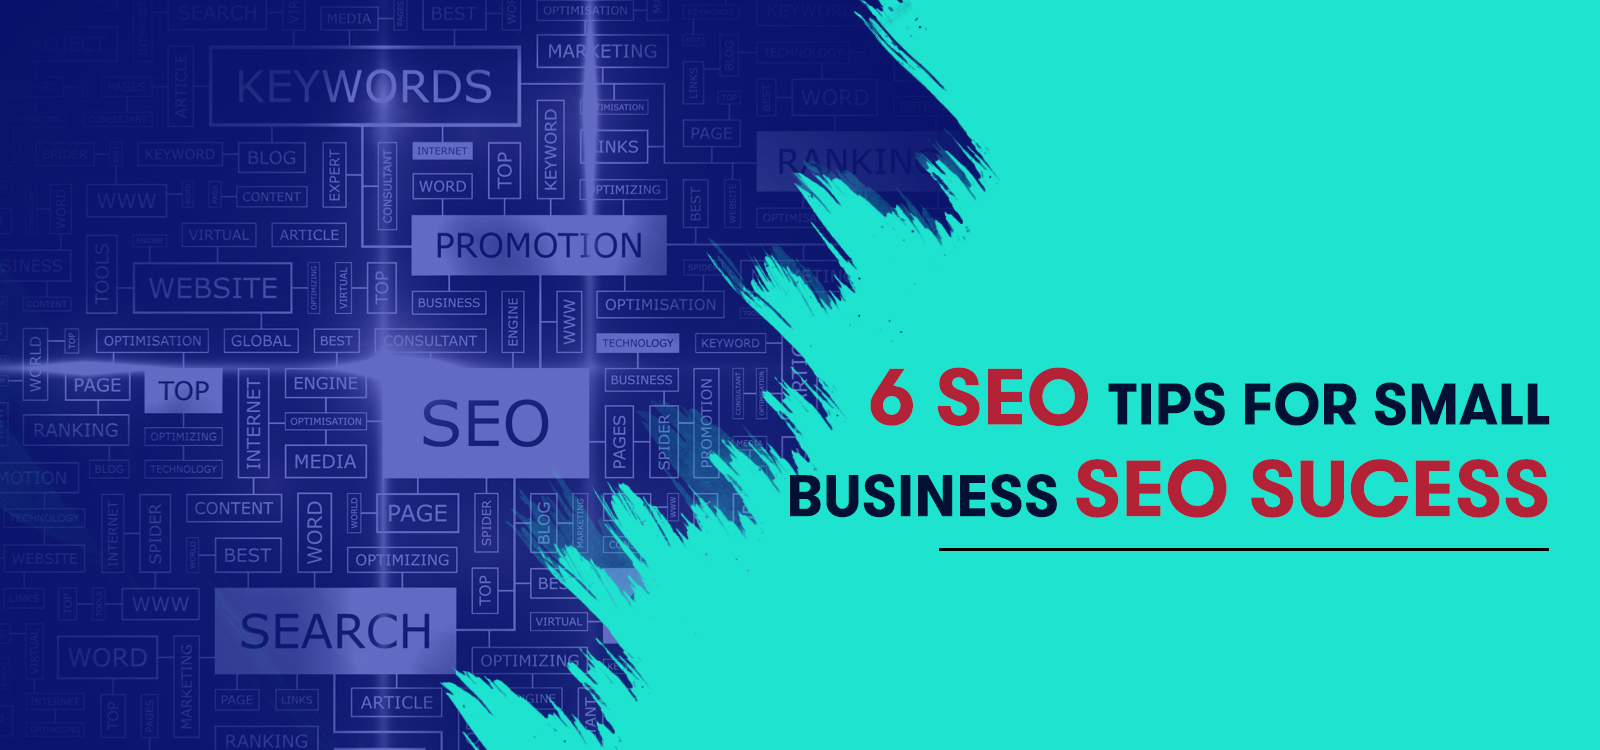 6 SEO tips for small business SEO success